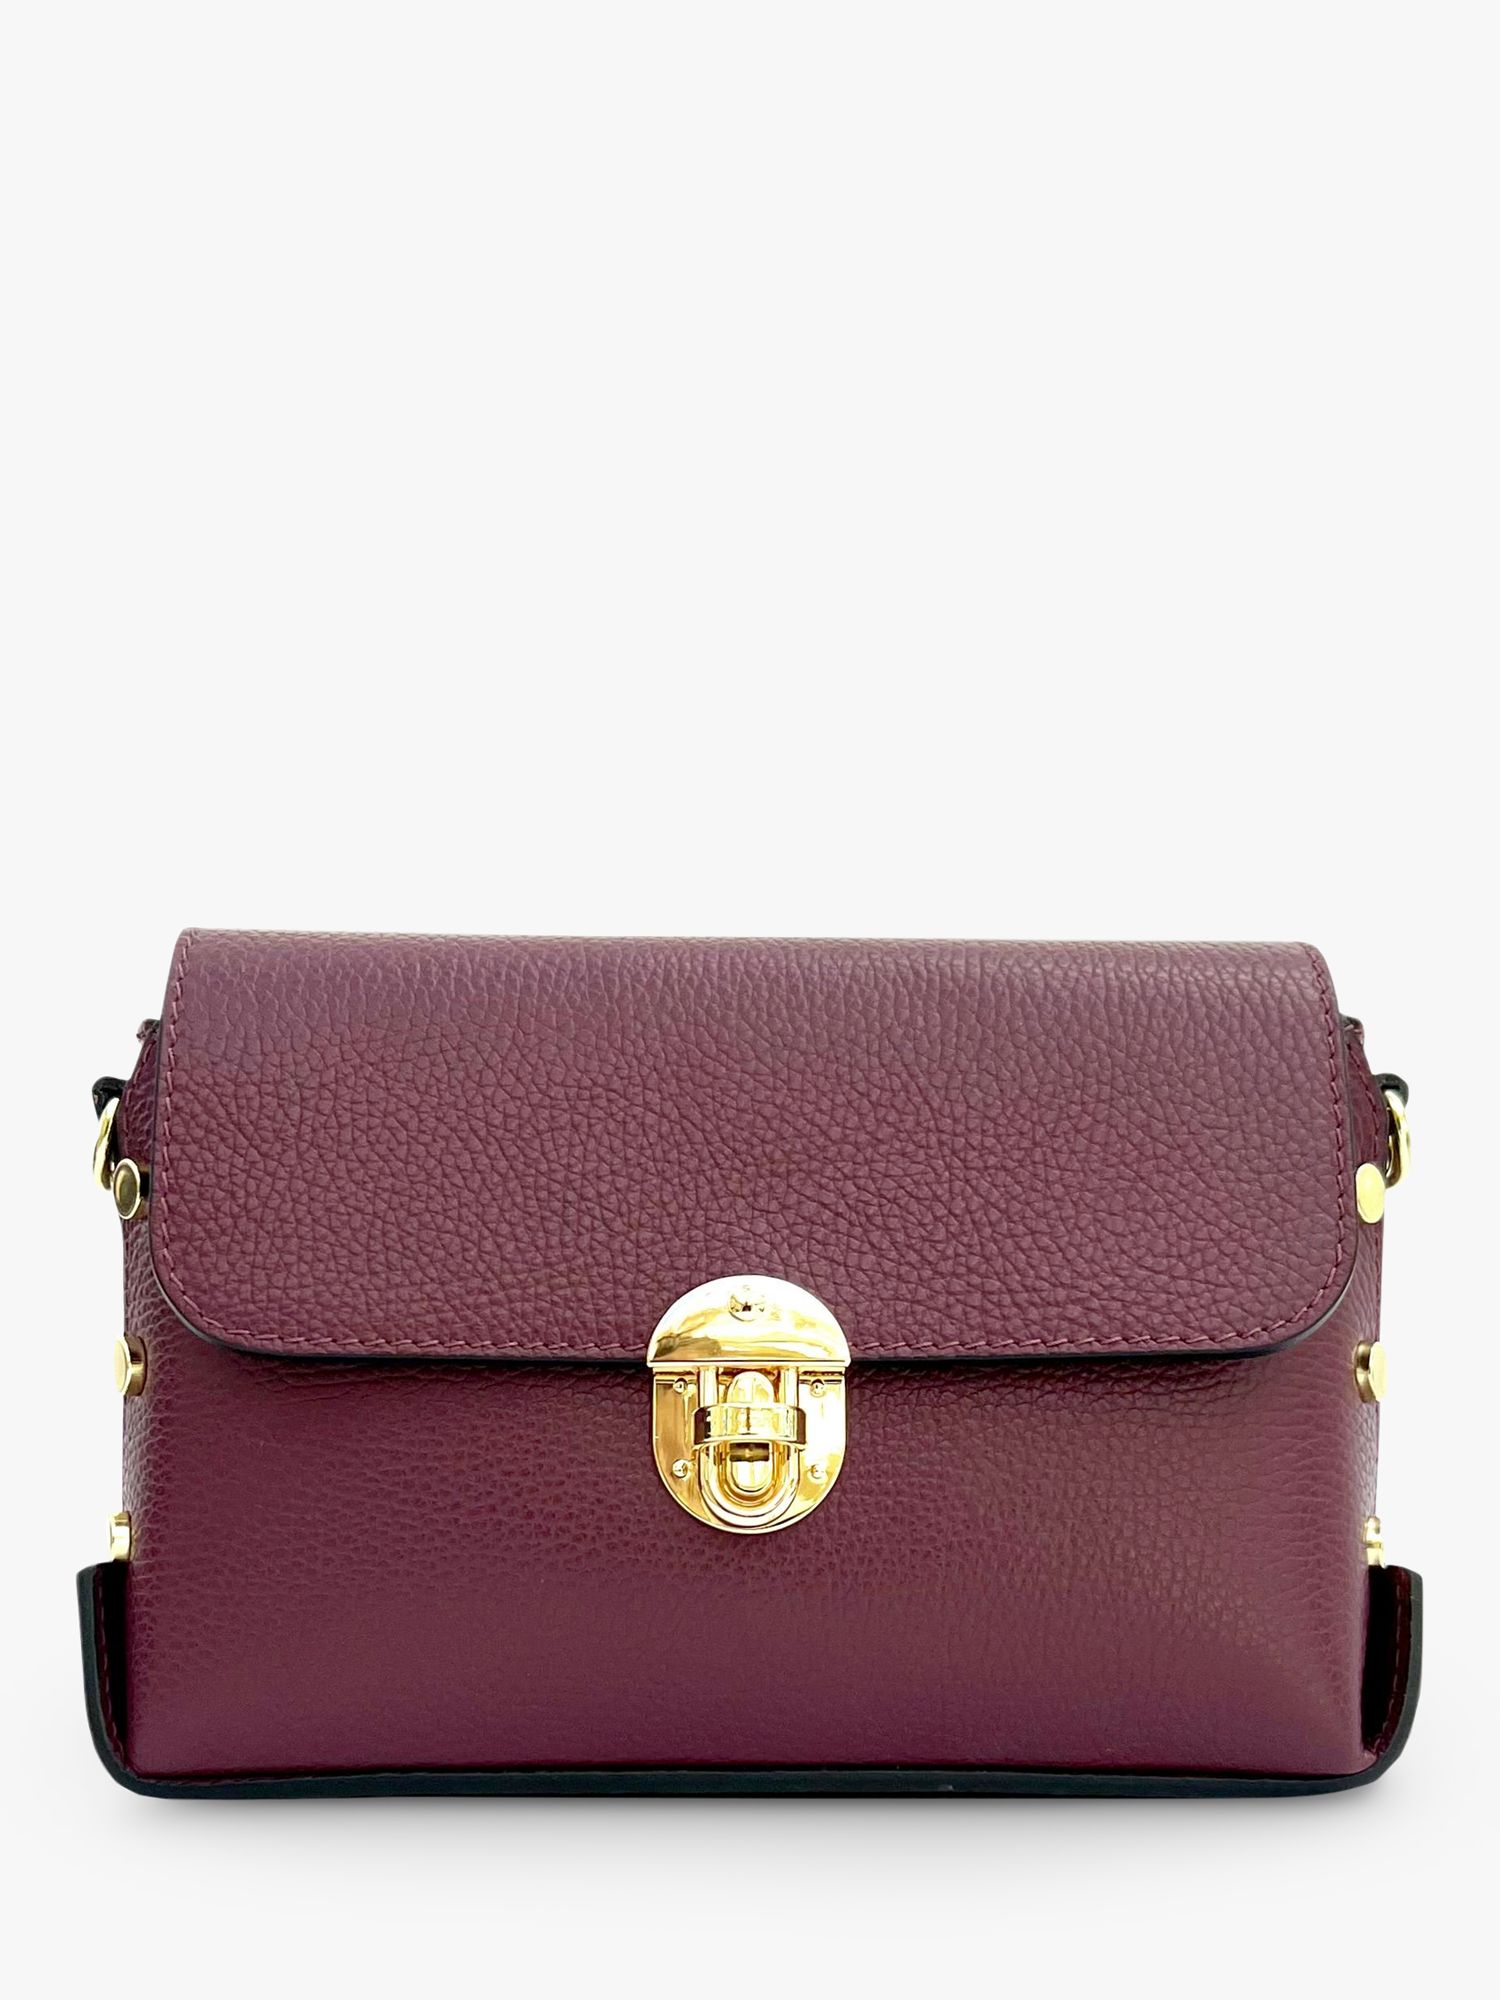 Buy Apatchy The Bloxsome Chain Strap Leather Cross Body Bag Online at johnlewis.com